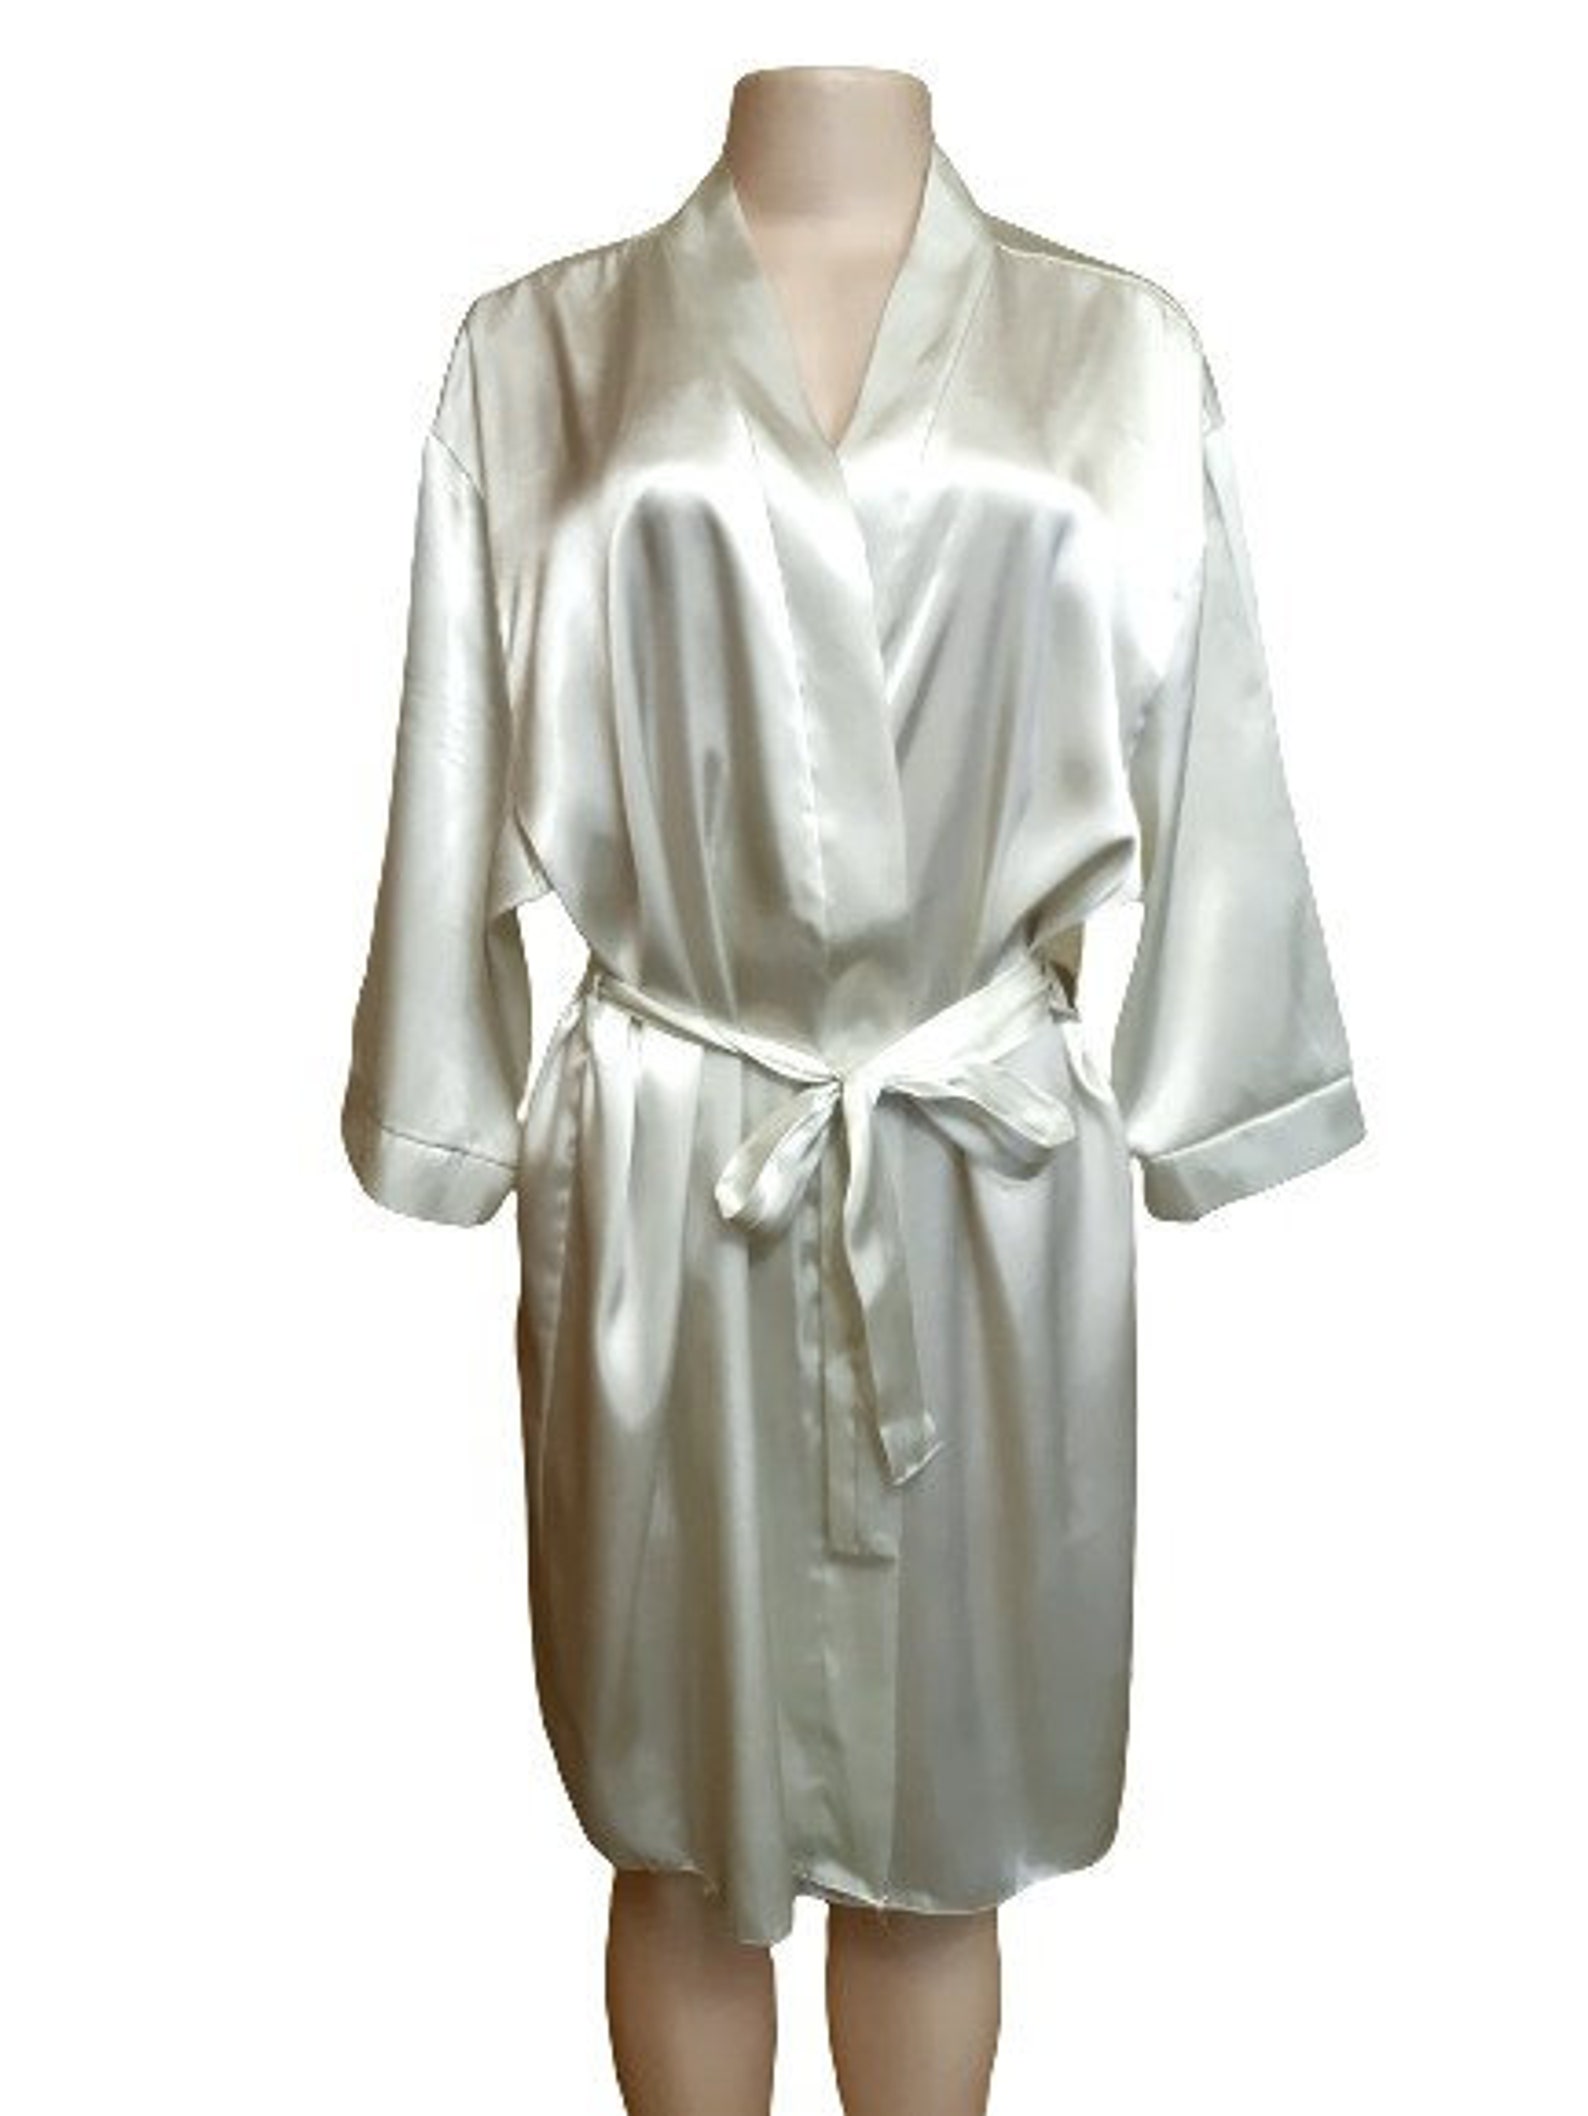 L-2XL Delicate knee-length satin robe with belt home wrap | Etsy